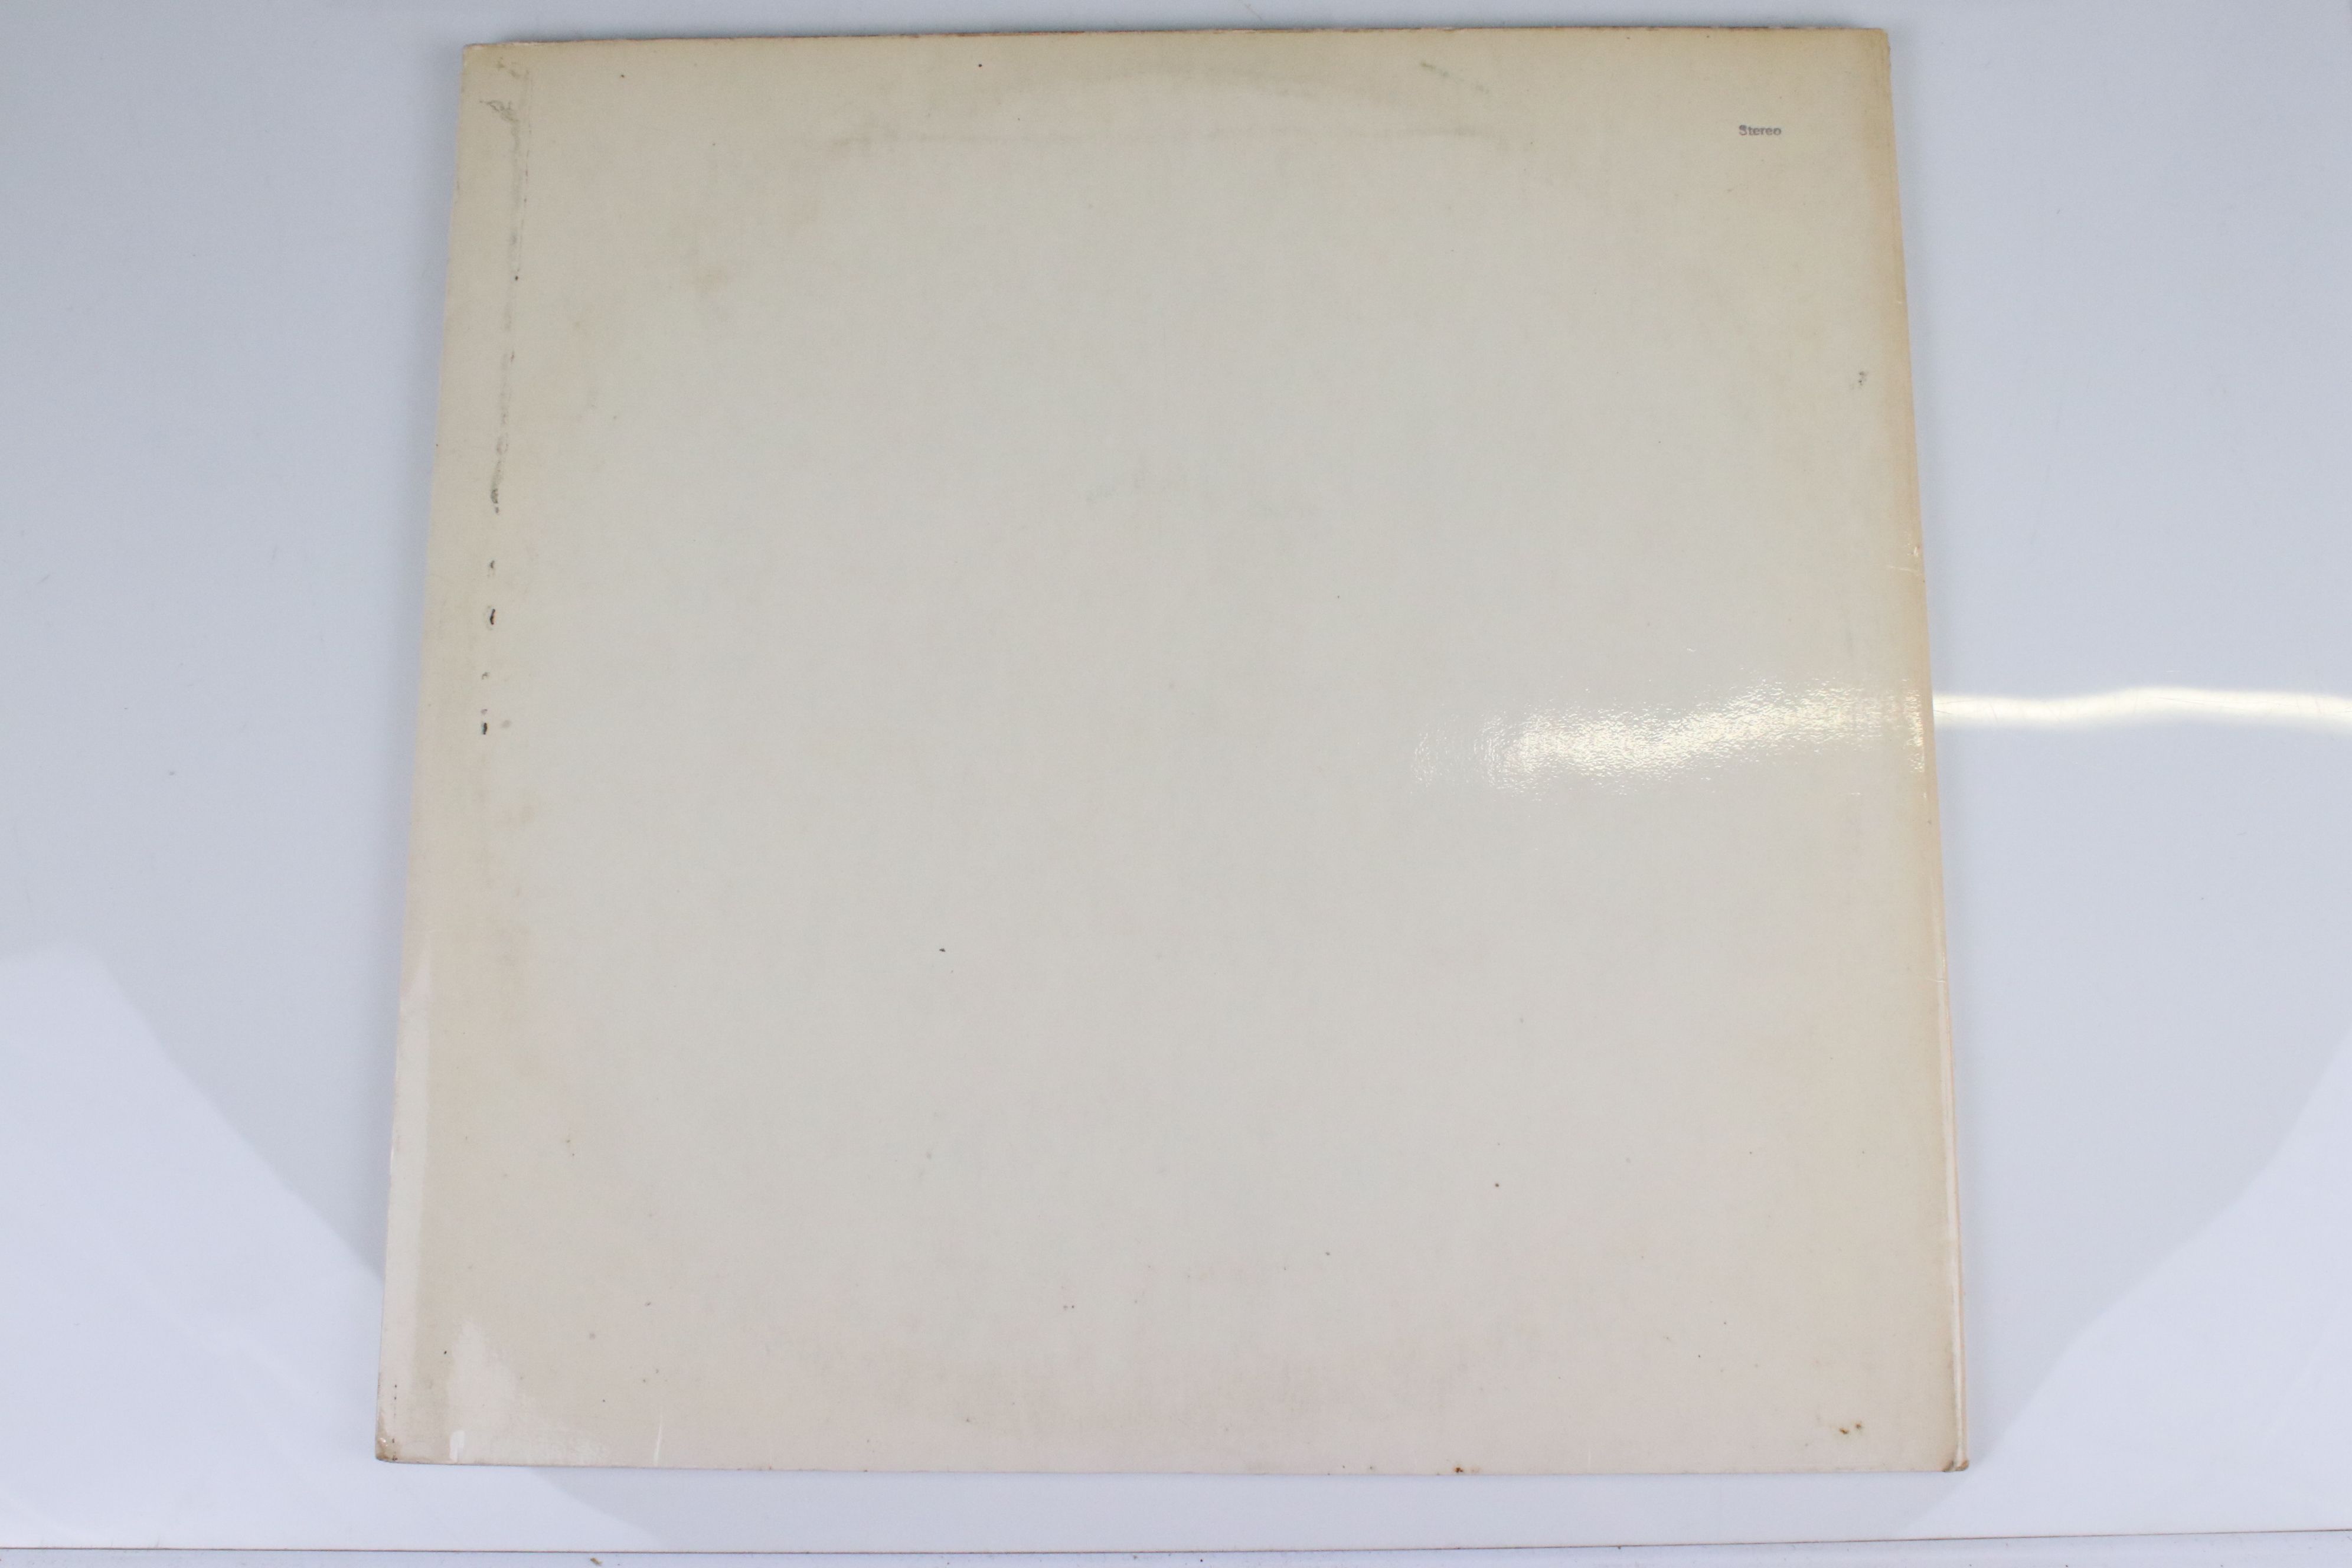 Vinyl - The Beatles - The White Album, numbered 0418438, top loading double sleeve with original - Image 8 of 8